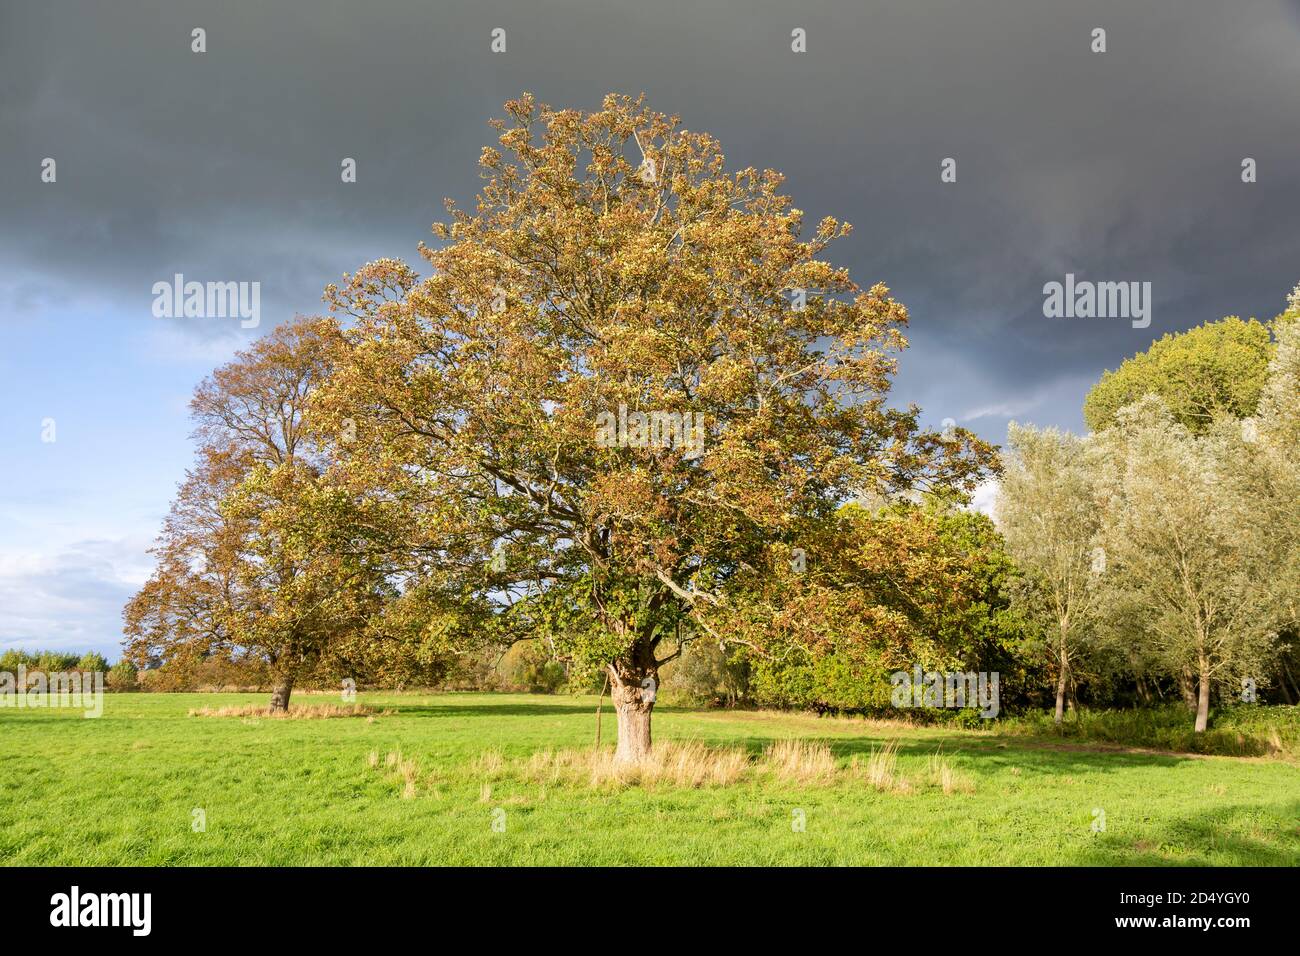 Sycamore trees, Acer pseudoplatanus, standing in field dramatic sky, Methersgate, Suffolk, England, UK Stock Photo